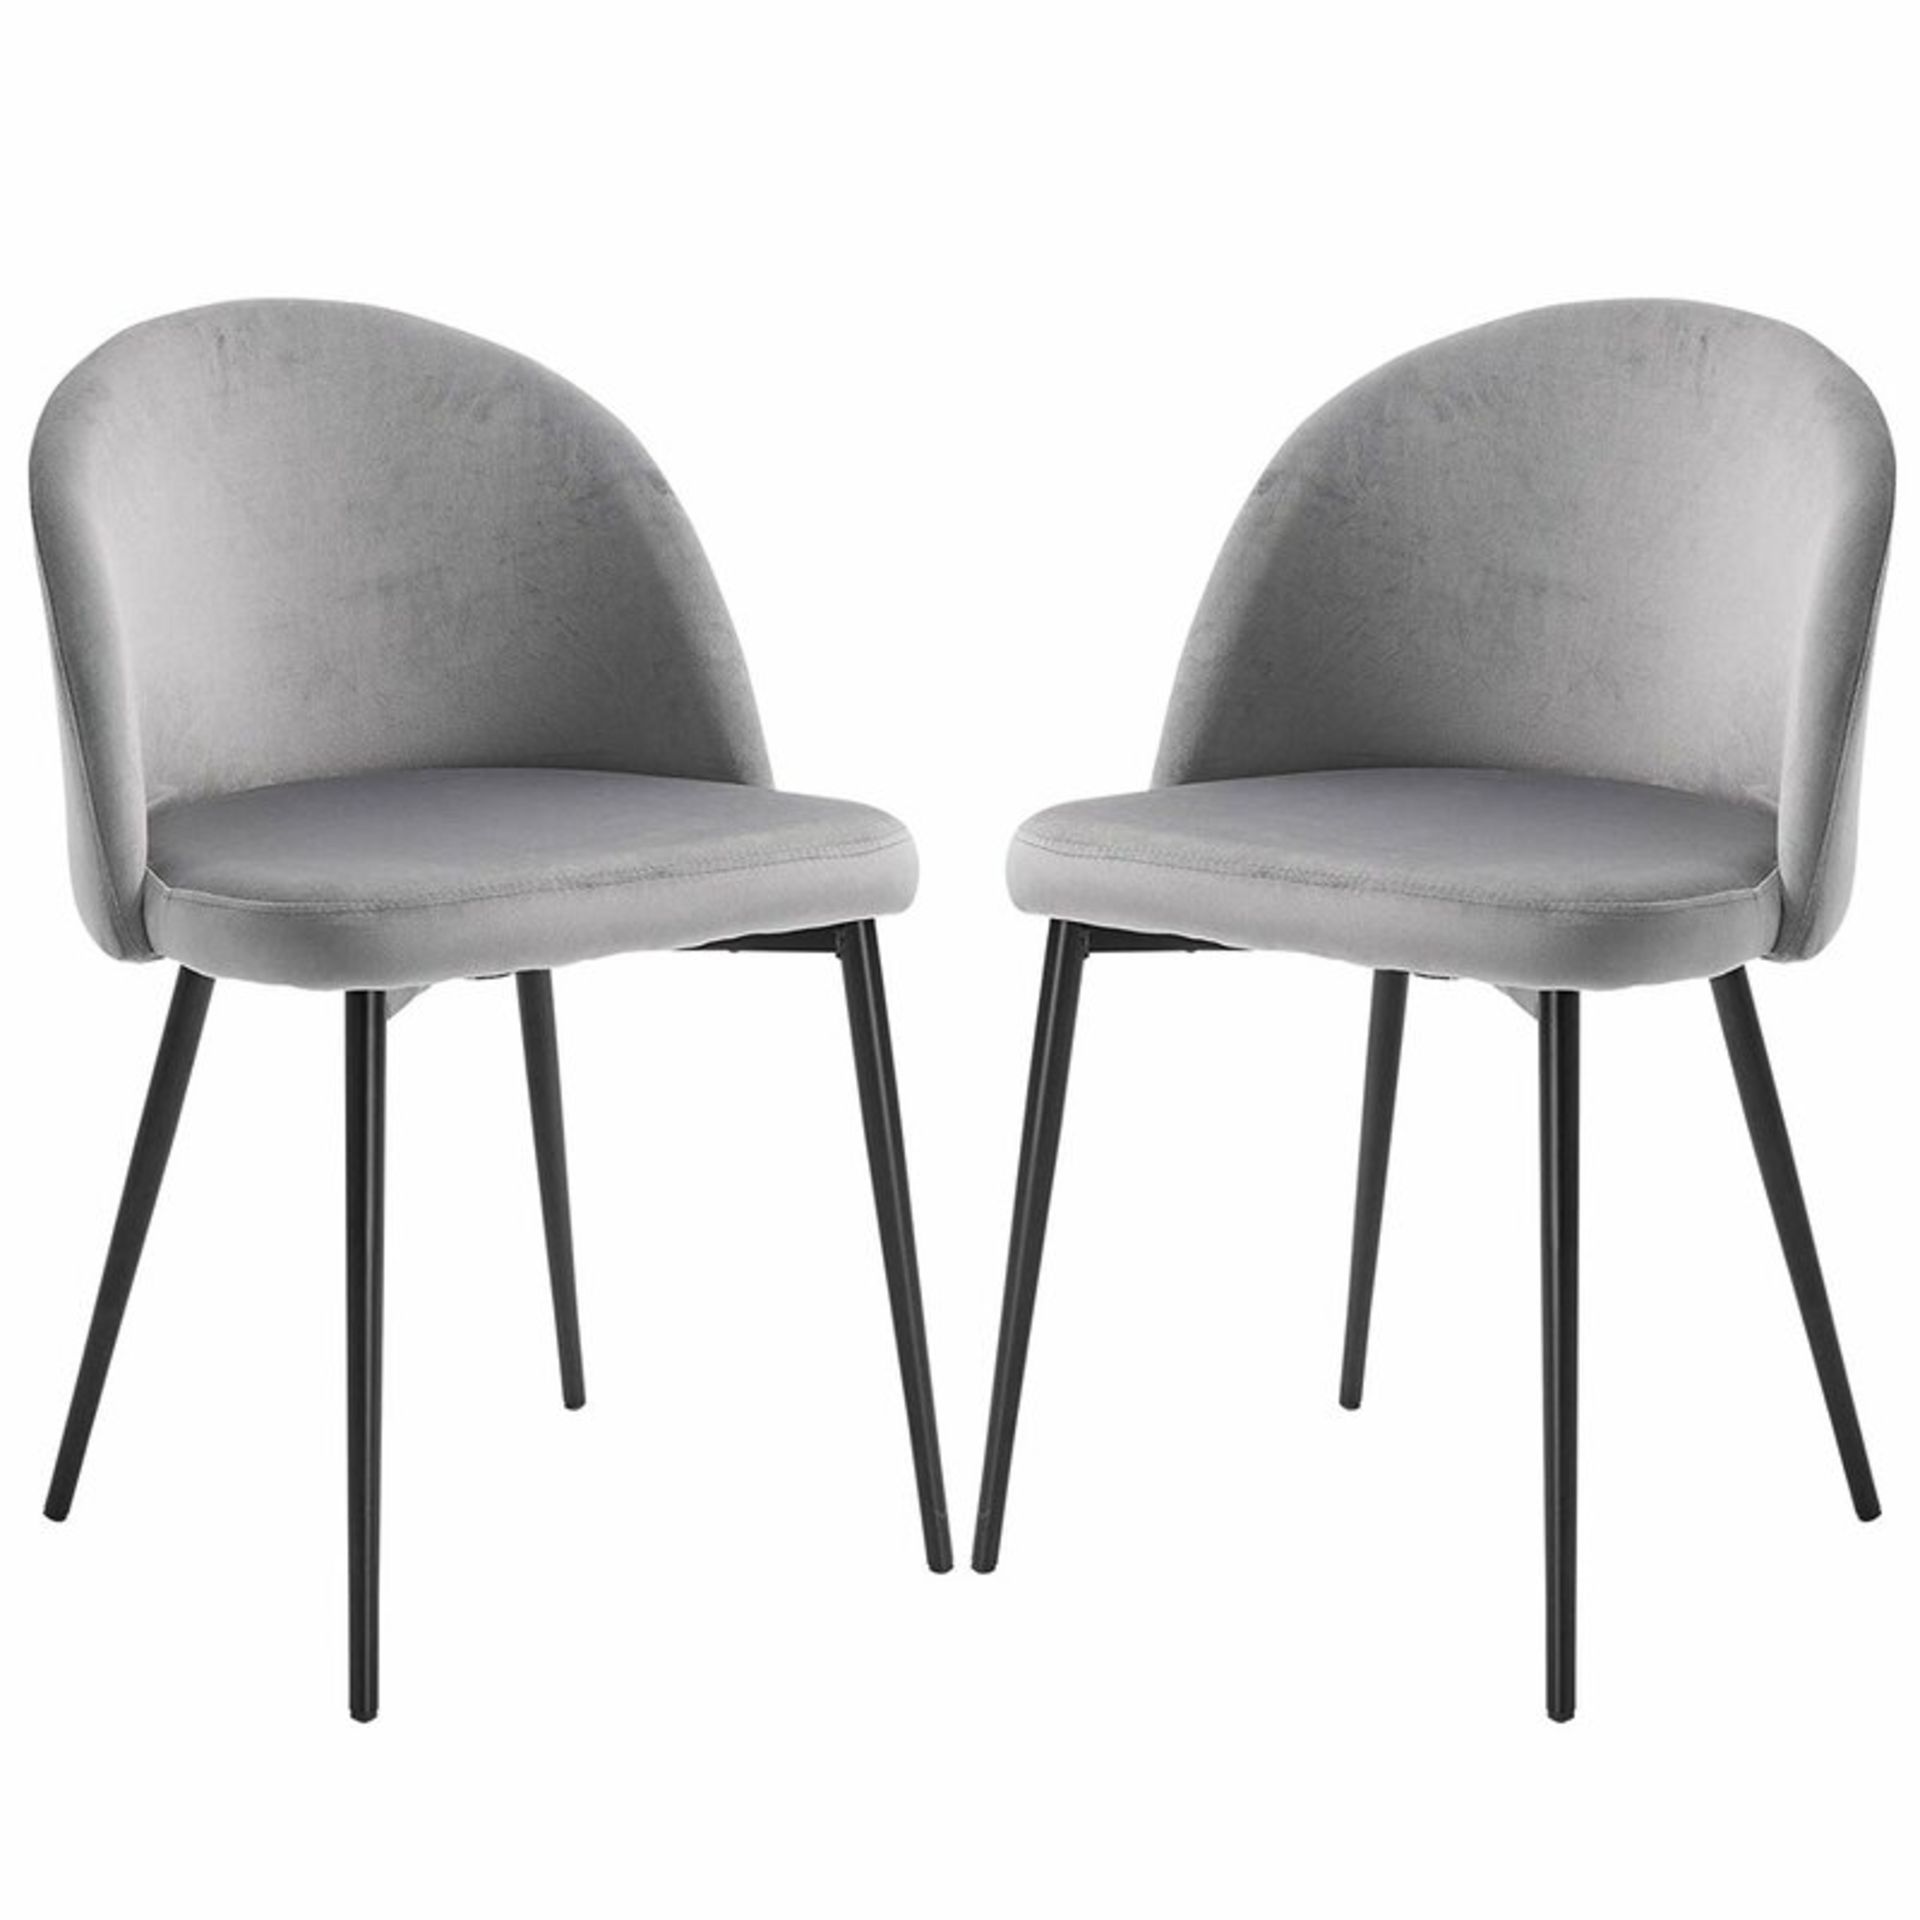 Ebern Design Grey Upholstered Dining Chair (Set of 2) By Ebern - RRP £96.99